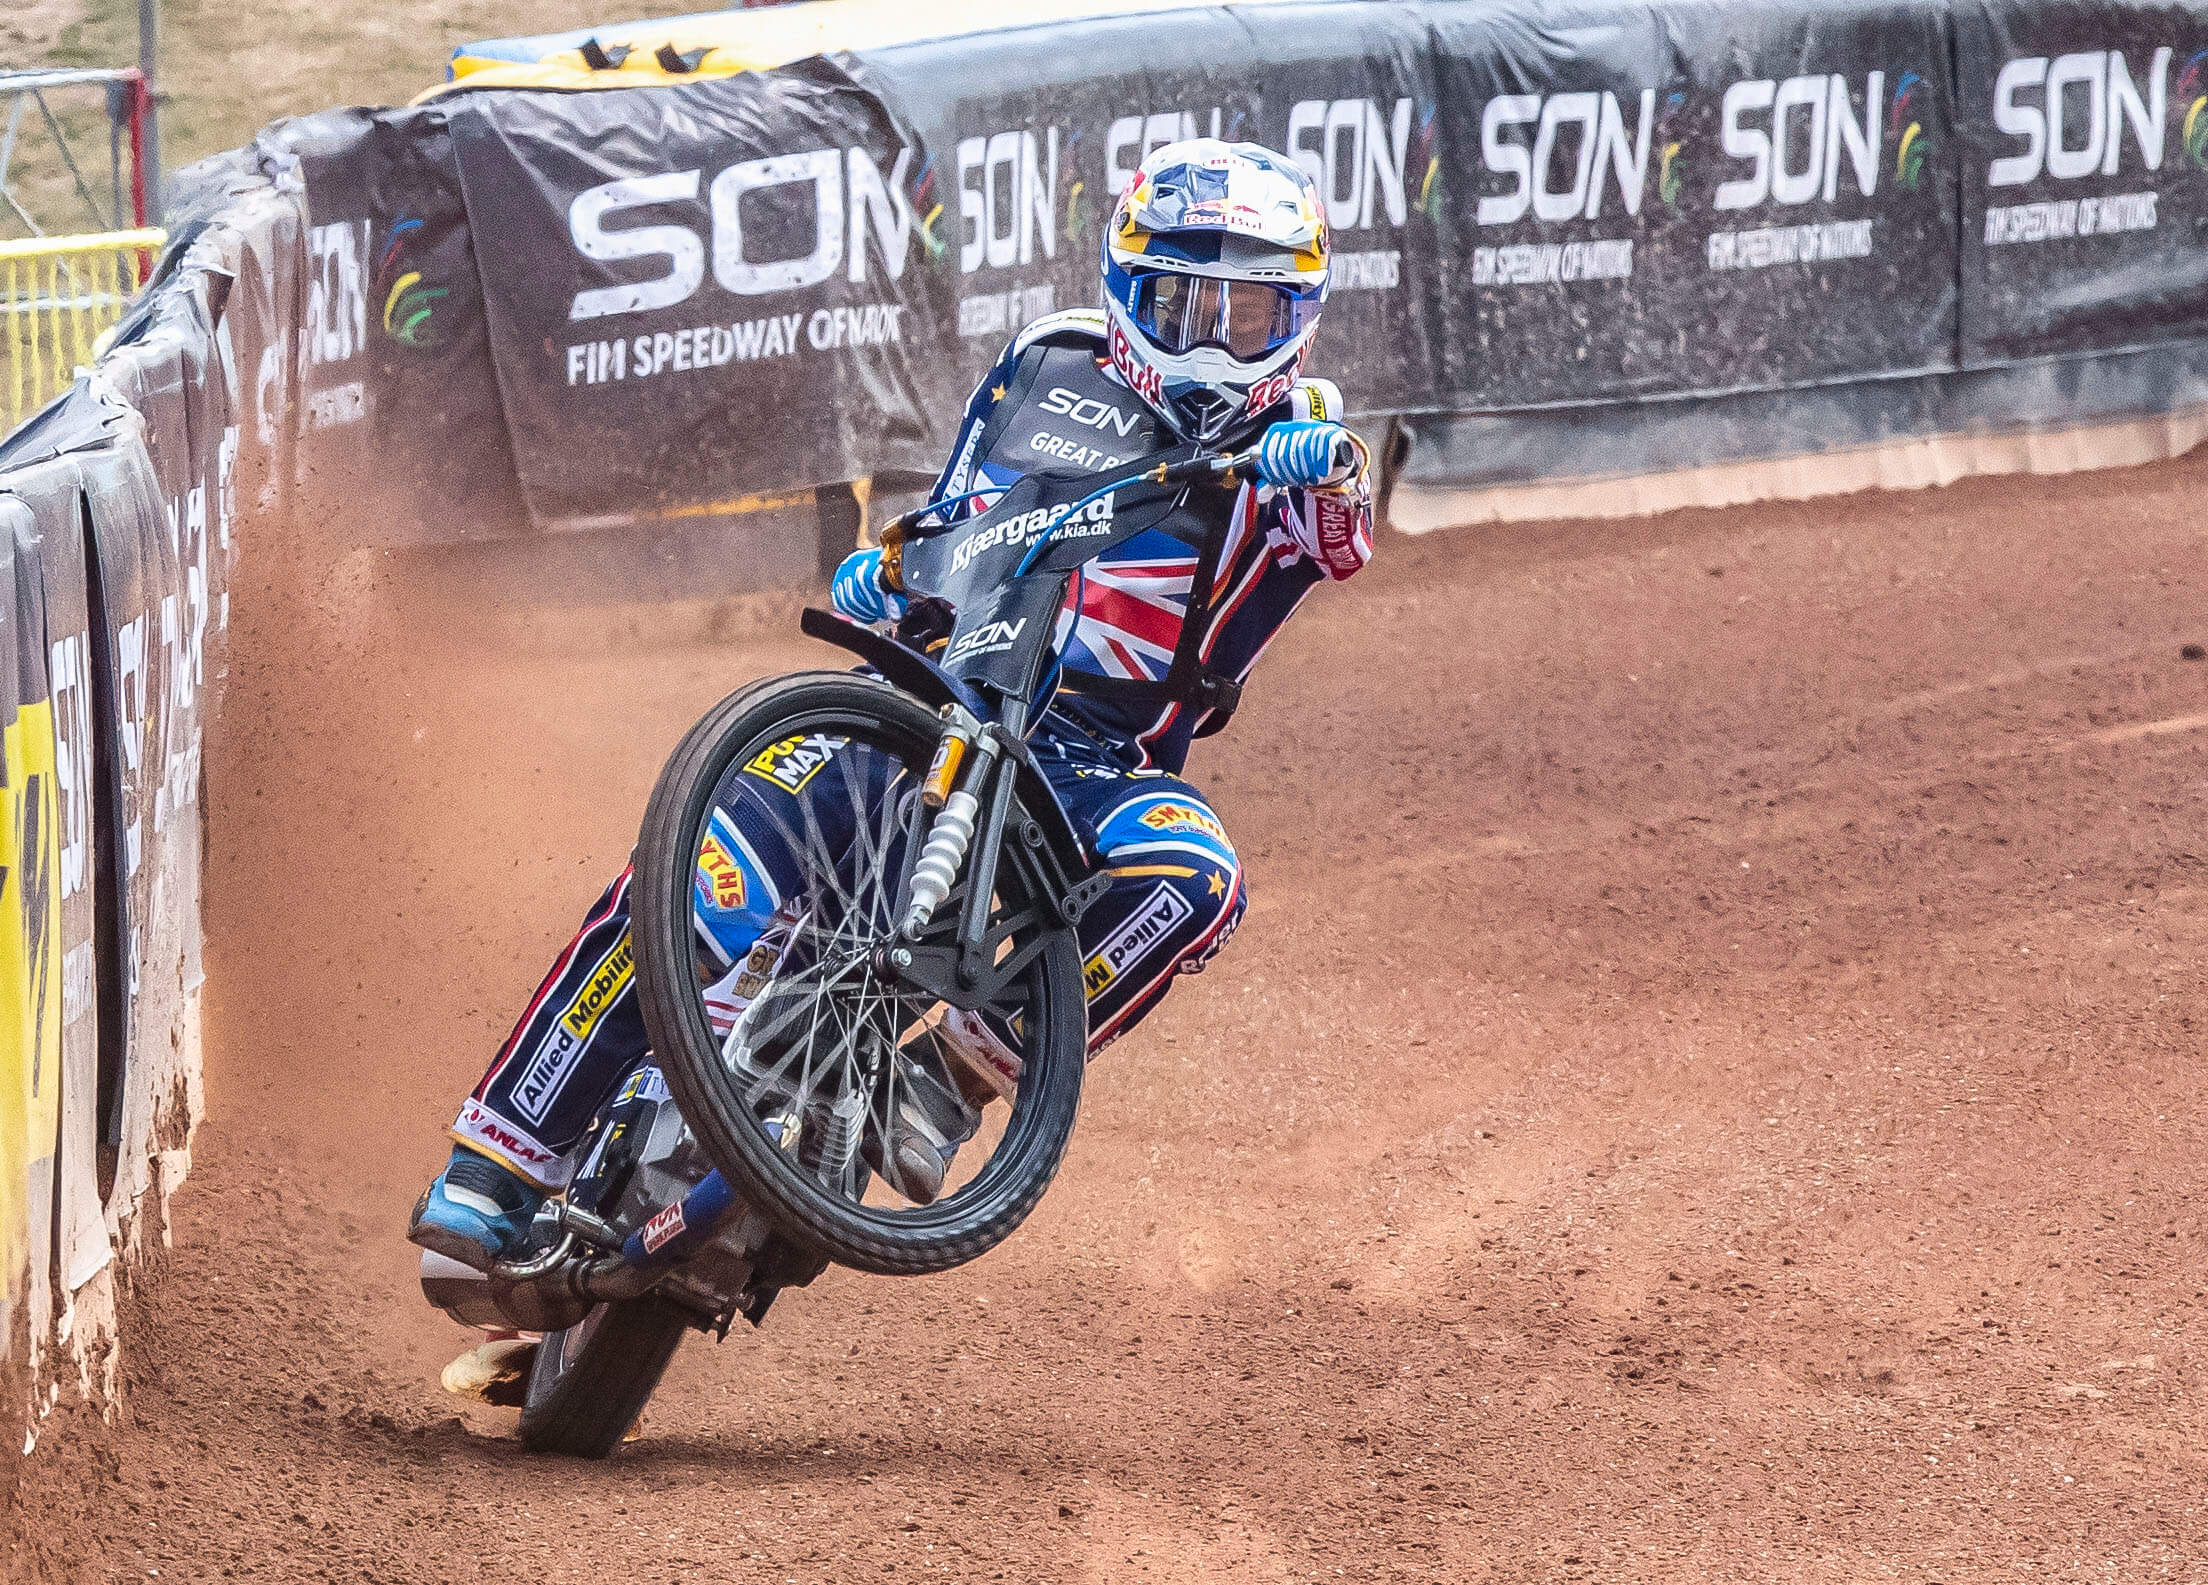 Speedway Of Nations 2022 Man On Motorbike Action Shot on Dirt Track with Fencing and Banners